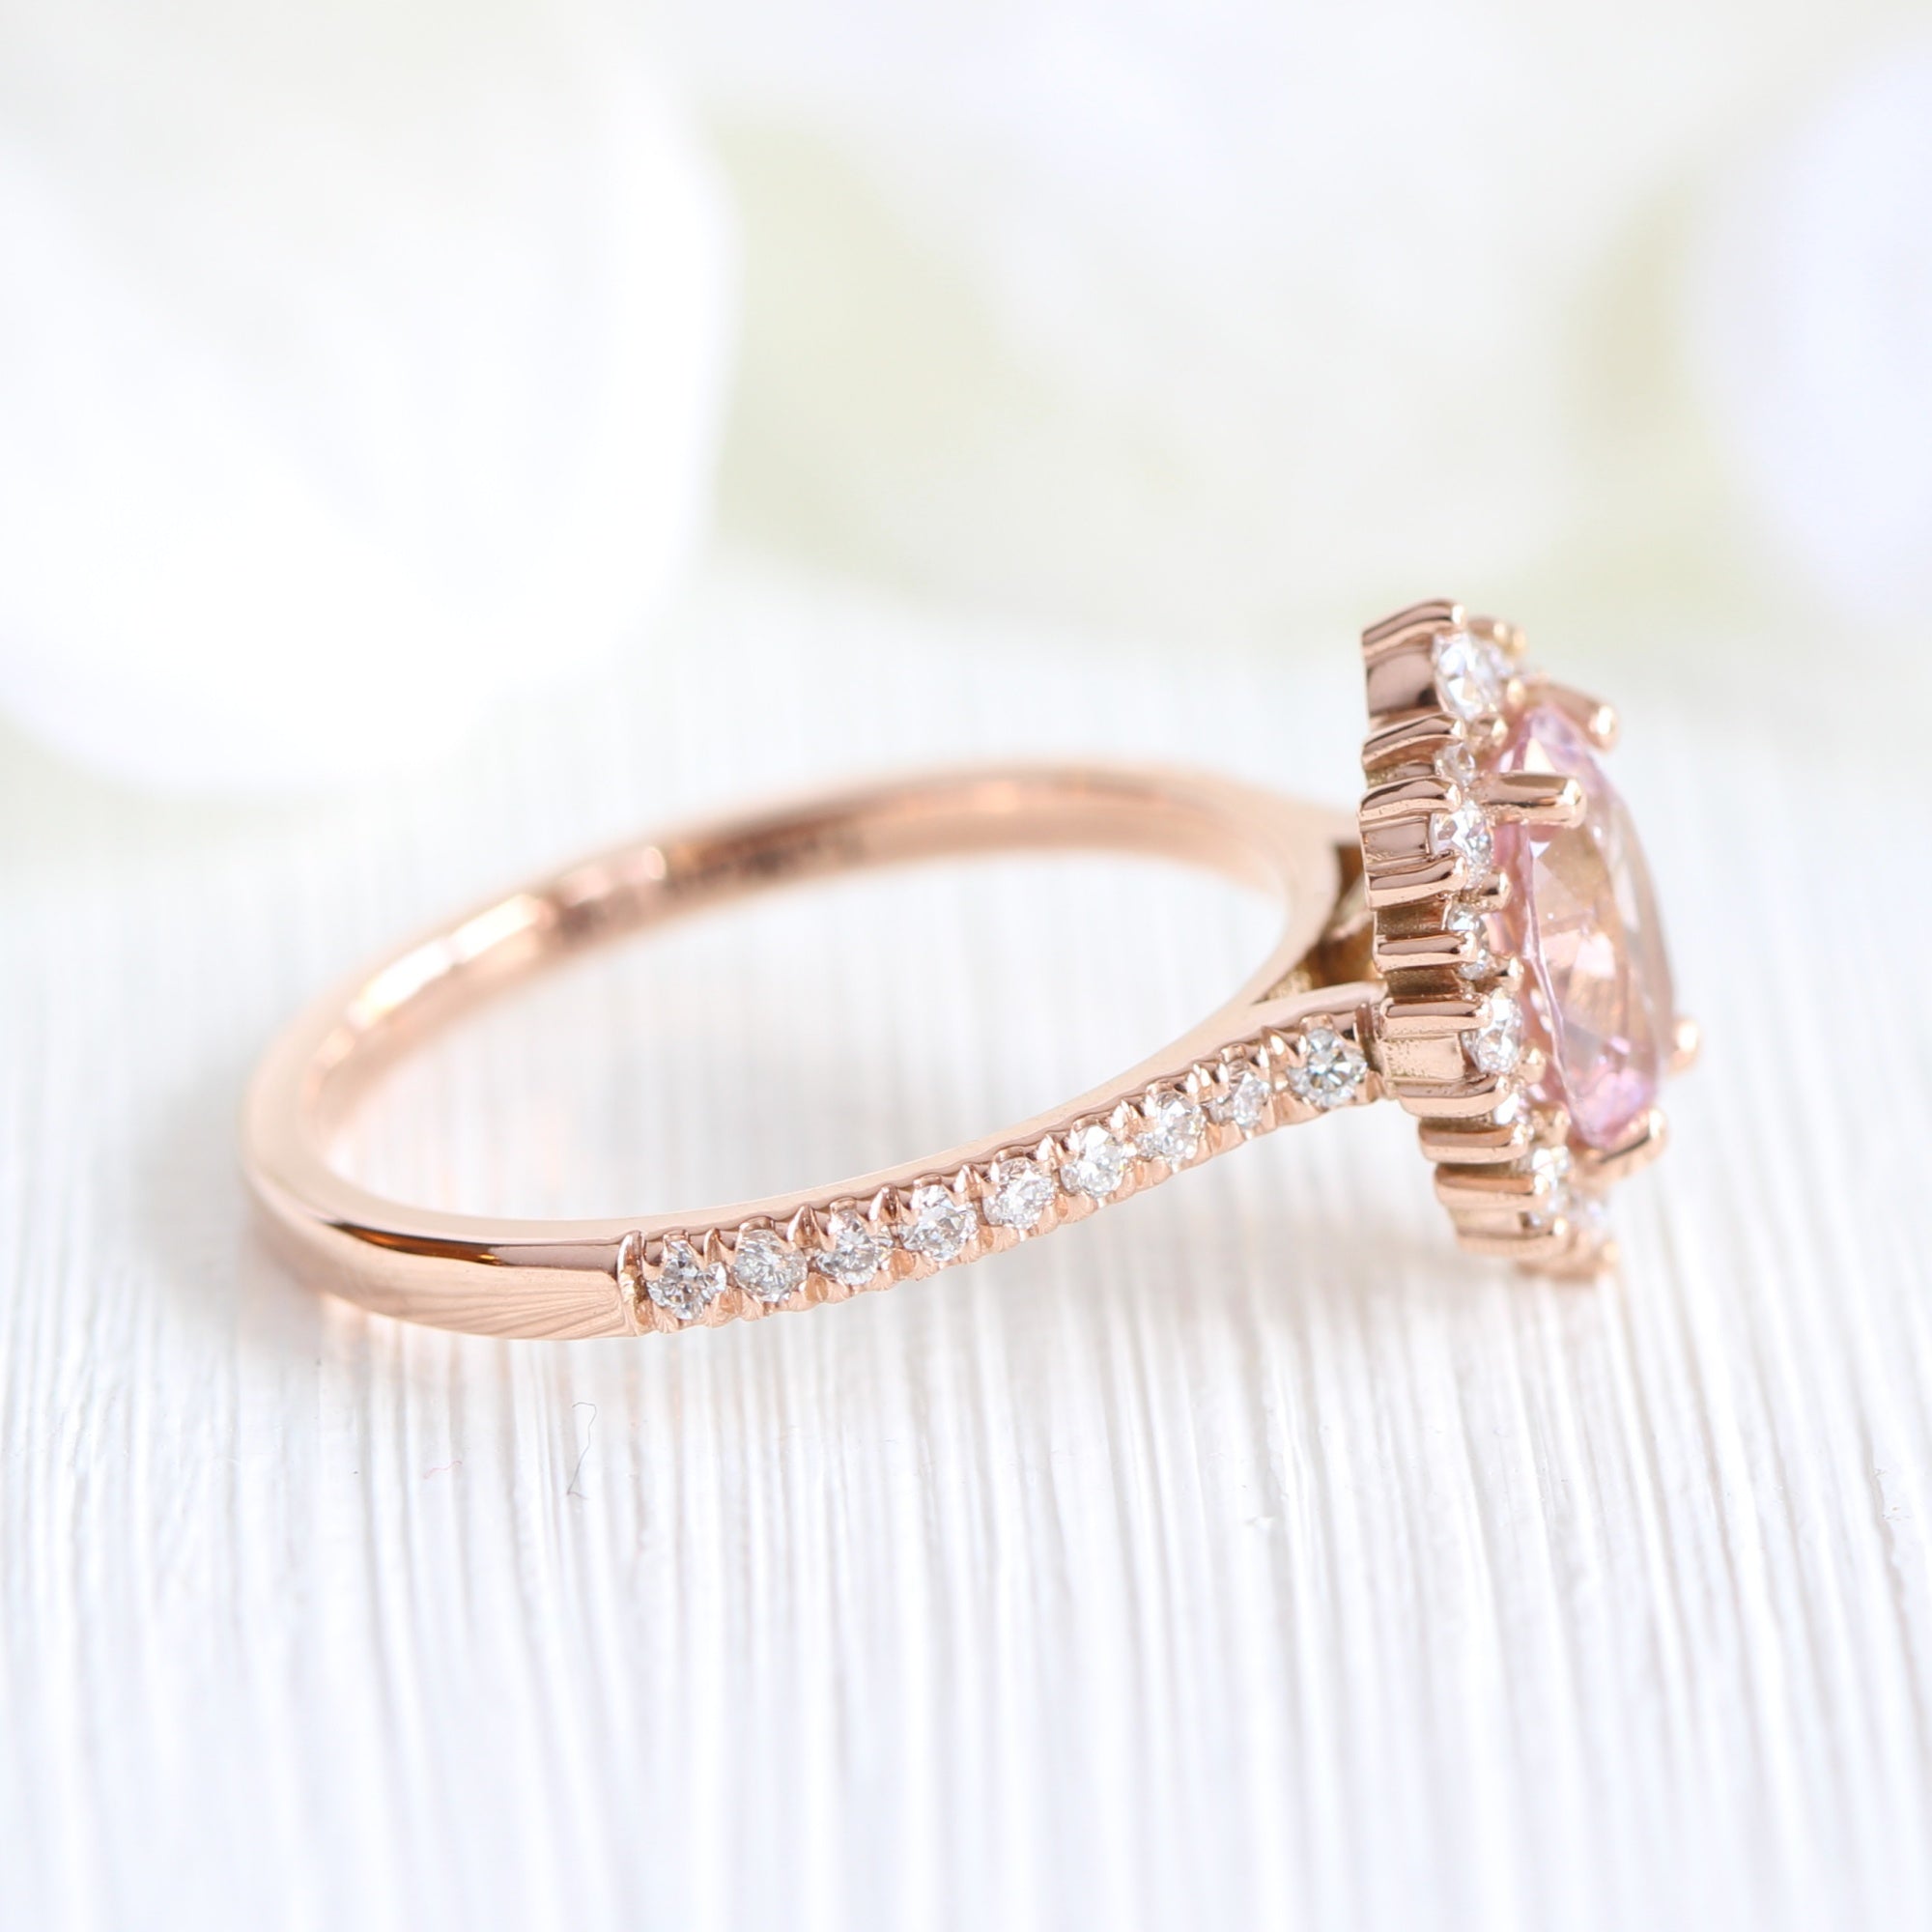 Oval padparadscha sapphire ring rose gold halo diamond engagement ring la more design jewelry